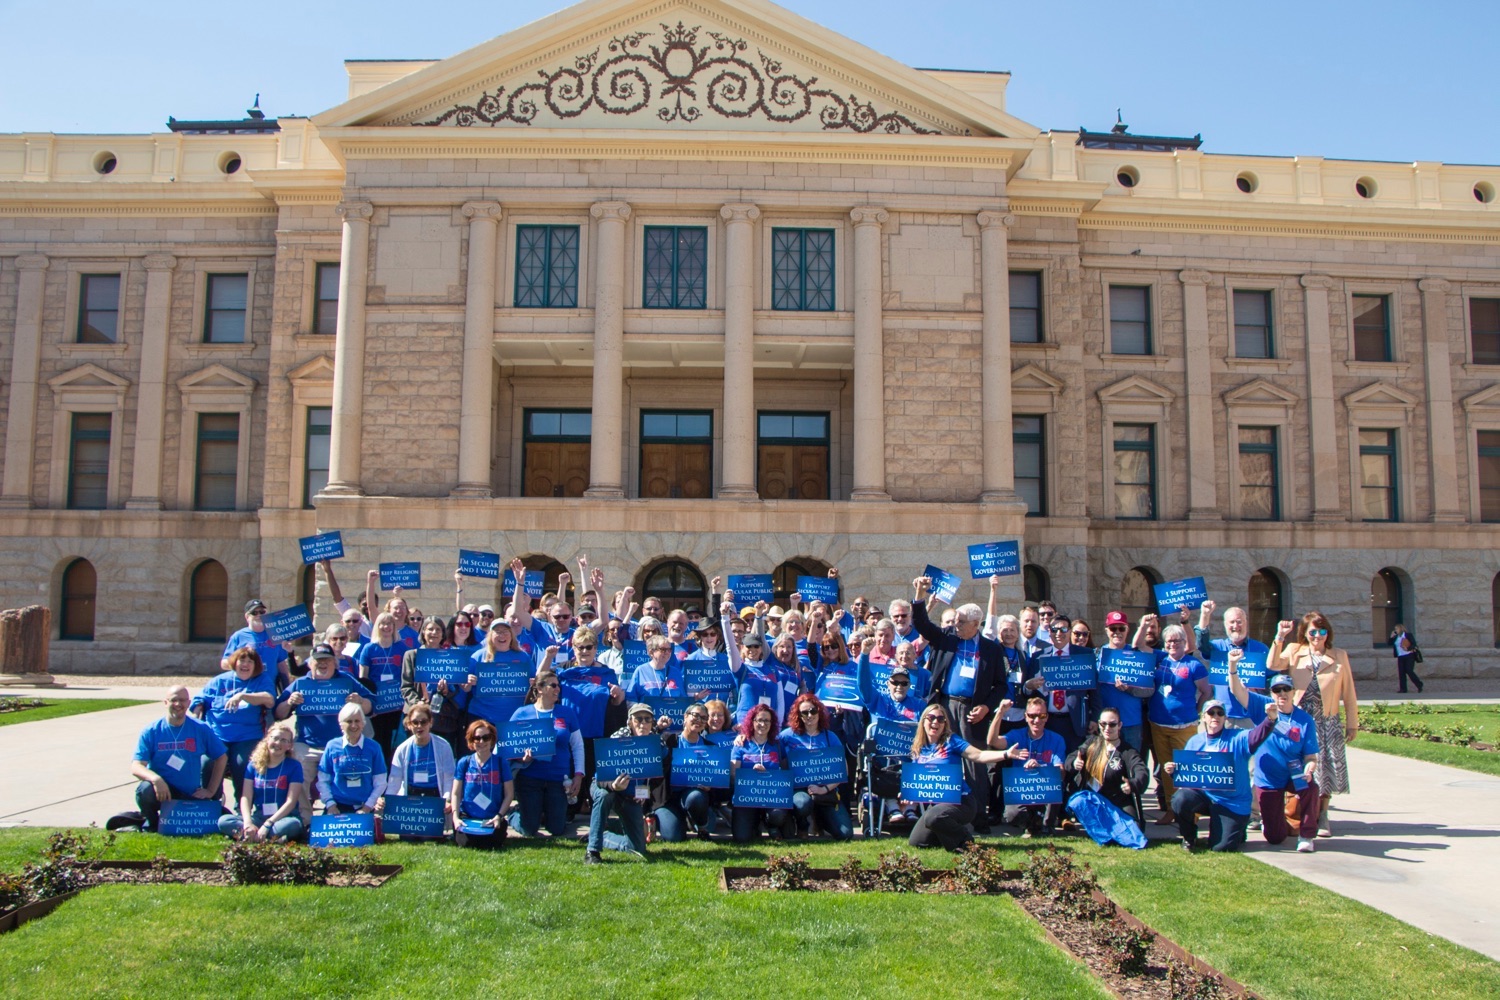 Group of secular supporters wearing blue Secular AZ shirts gather in front of the state capitol to take action toward building the wall between church and state